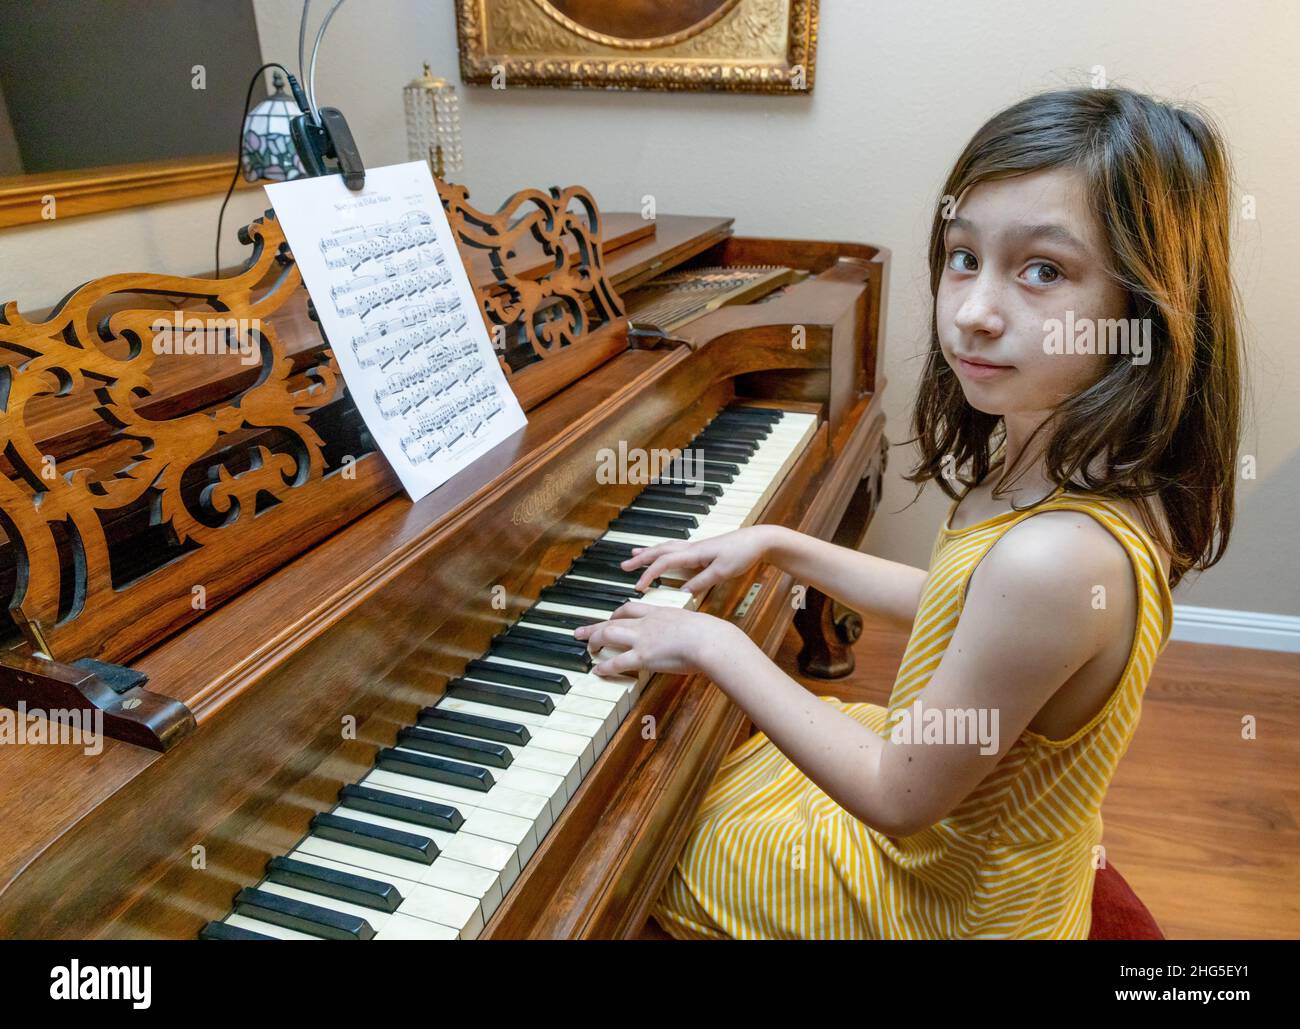 A young girl in a yellow dress playing a rare antique Chickering & Sons Square Grand piano built in 1867 with an antique painting in a gold frame. Stock Photo